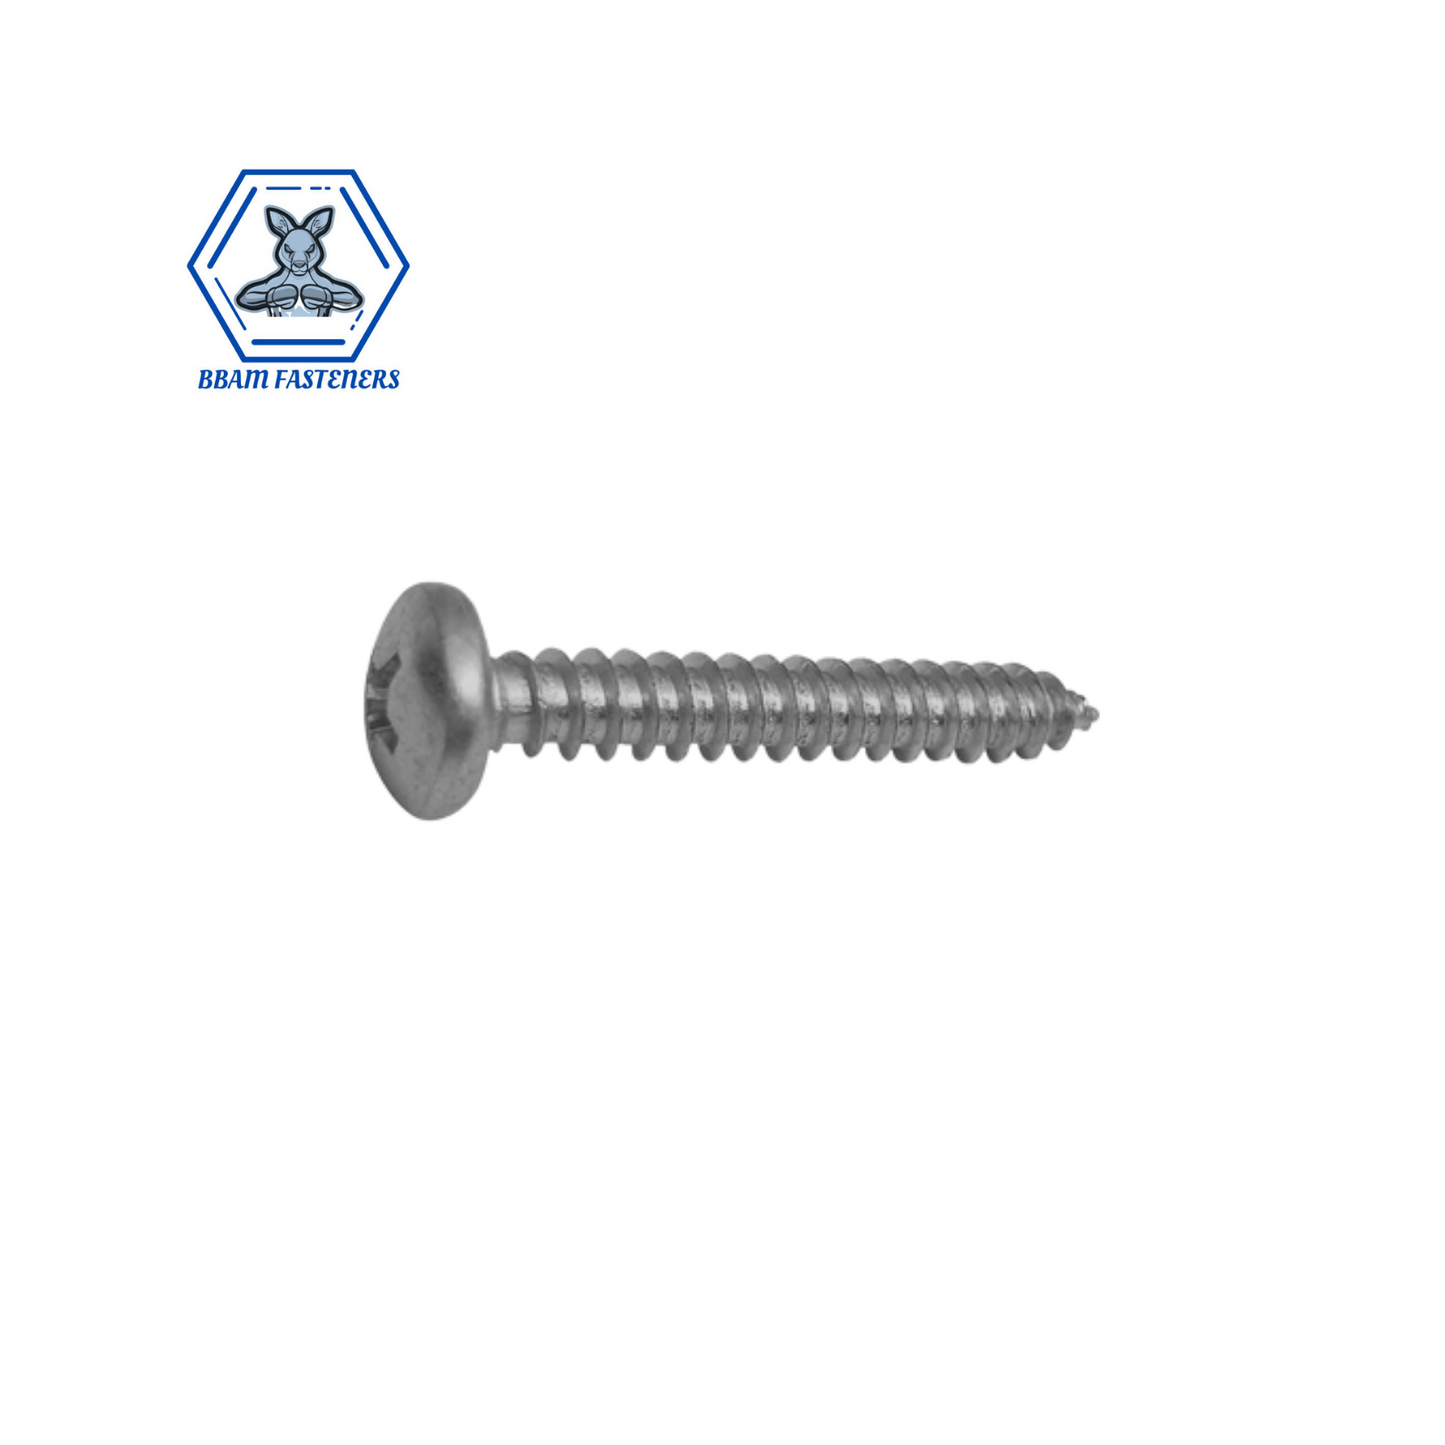 4G x 19mm Pan Phillips Self Tapping Screws Stainless Steel